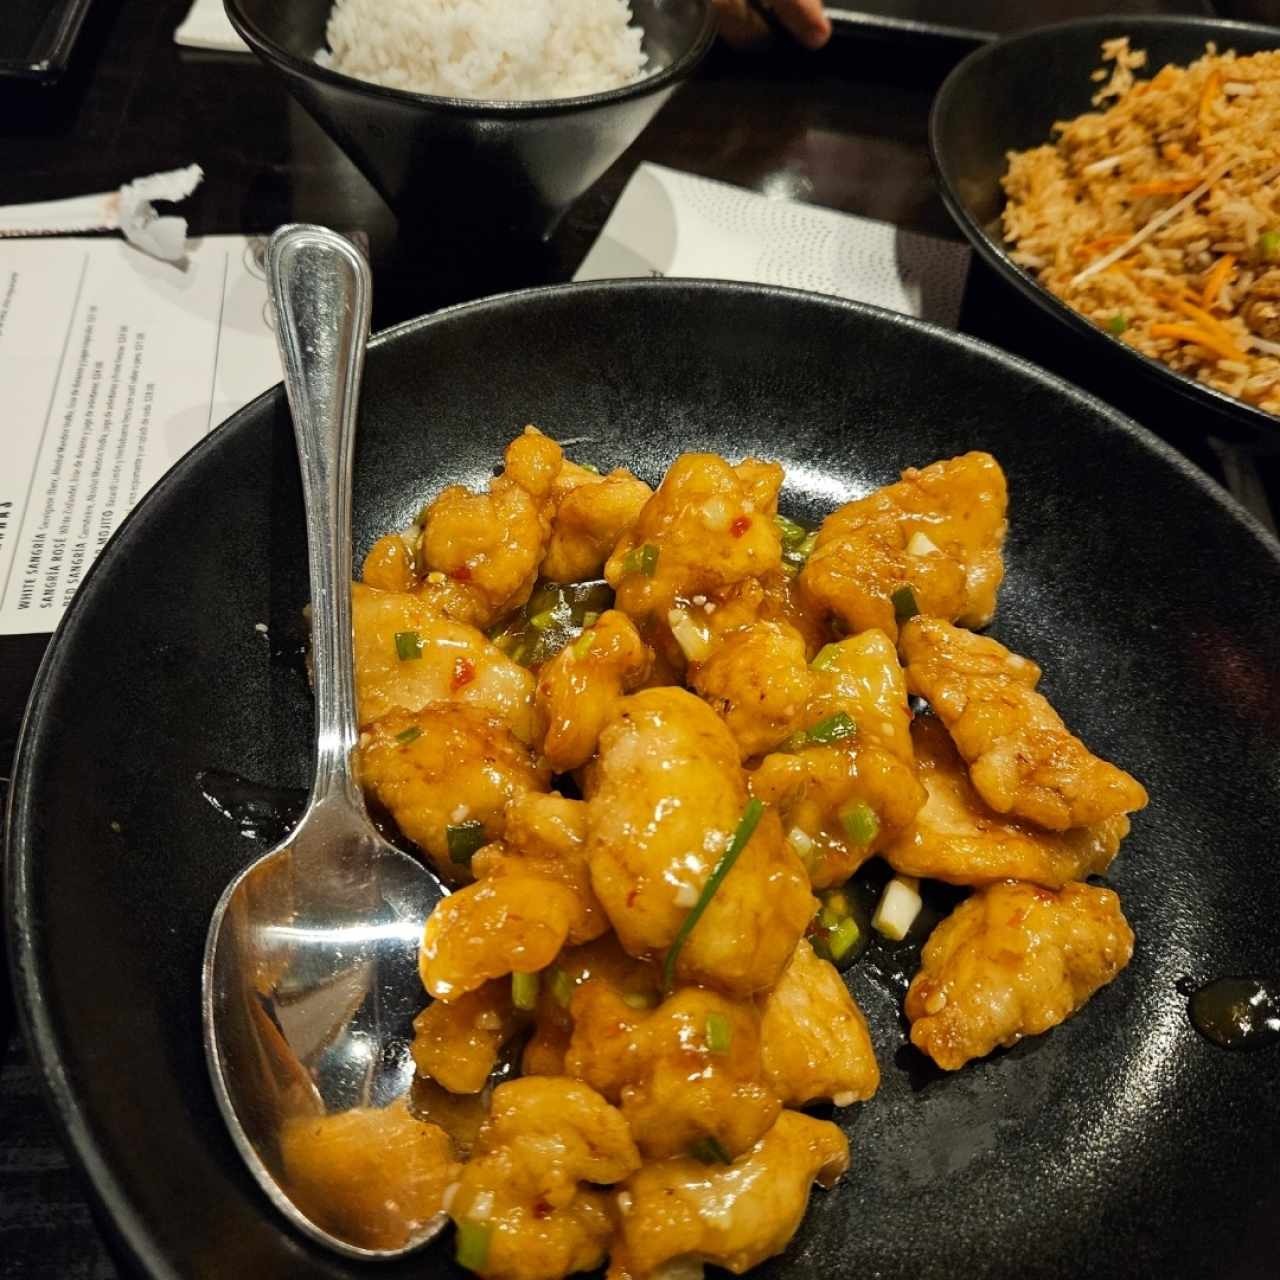 Chang's Spicy Chicken